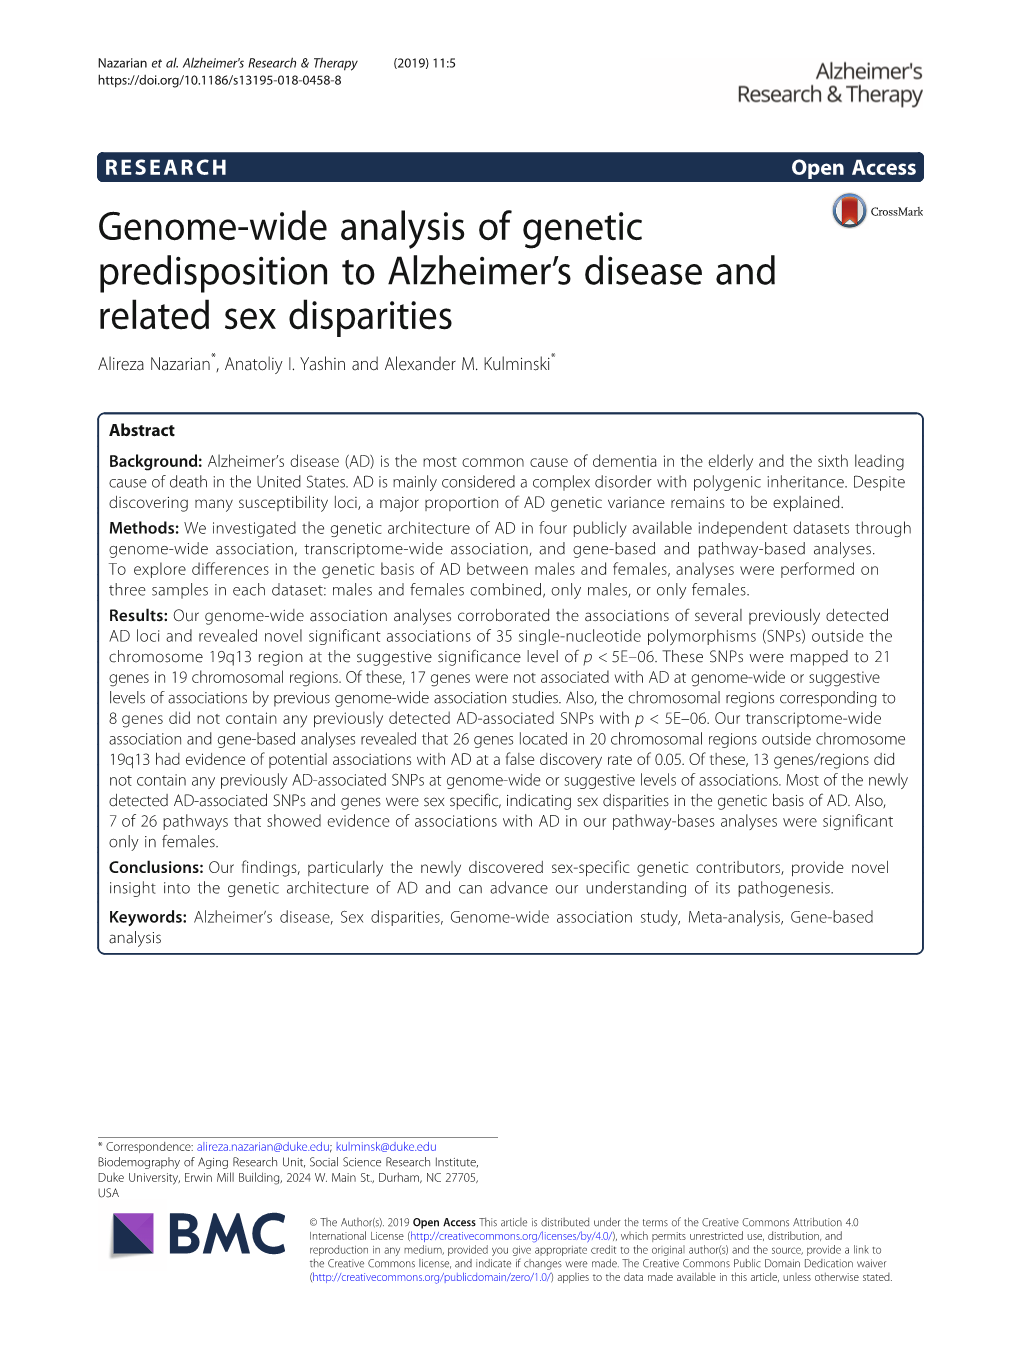 Genome-Wide Analysis of Genetic Predisposition to Alzheimer's